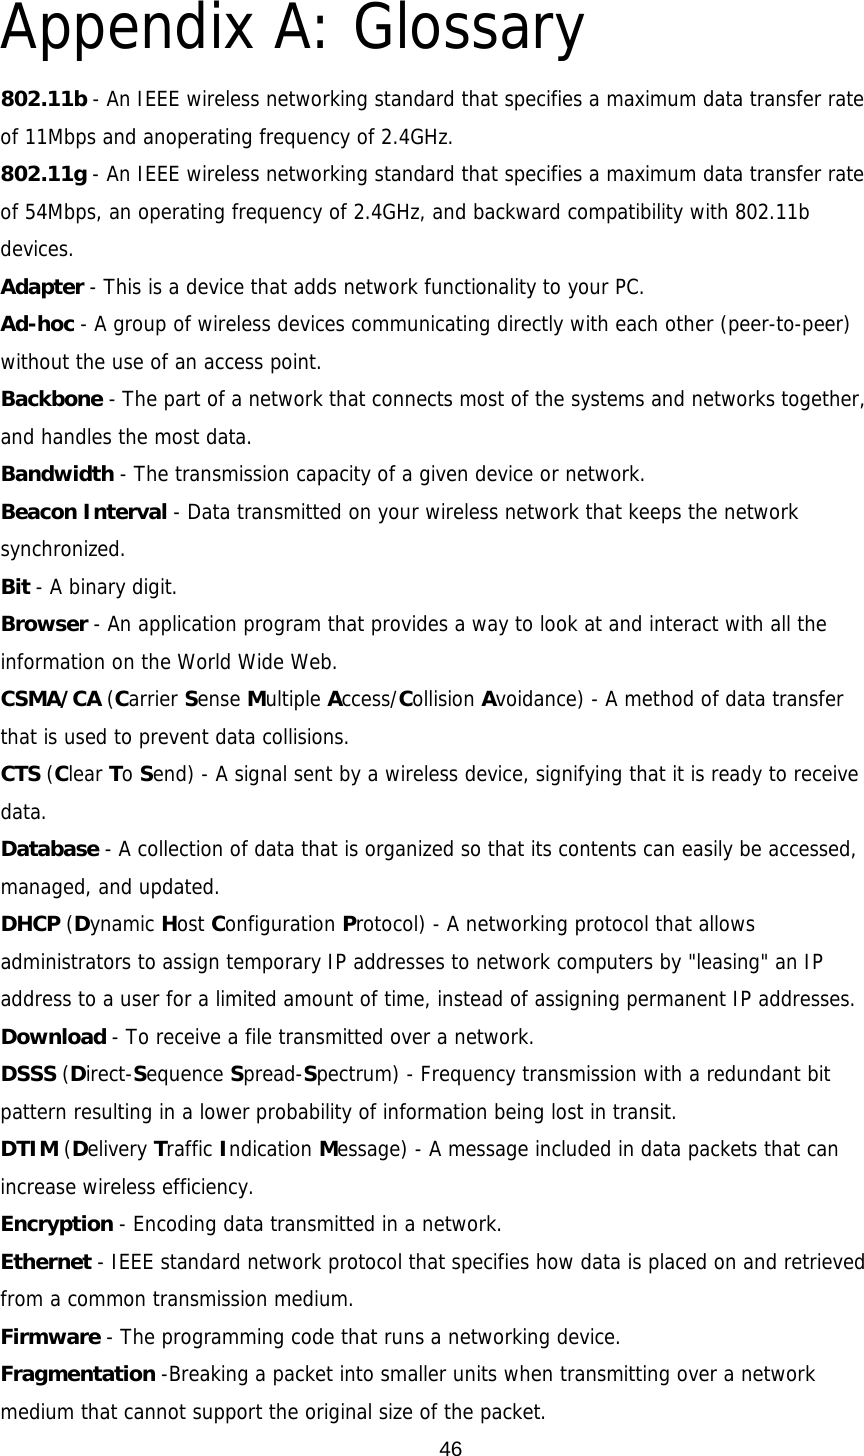  46Appendix A: Glossary 802.11b - An IEEE wireless networking standard that specifies a maximum data transfer rate of 11Mbps and anoperating frequency of 2.4GHz. 802.11g - An IEEE wireless networking standard that specifies a maximum data transfer rate of 54Mbps, an operating frequency of 2.4GHz, and backward compatibility with 802.11b devices. Adapter - This is a device that adds network functionality to your PC. Ad-hoc - A group of wireless devices communicating directly with each other (peer-to-peer) without the use of an access point. Backbone - The part of a network that connects most of the systems and networks together, and handles the most data. Bandwidth - The transmission capacity of a given device or network. Beacon Interval - Data transmitted on your wireless network that keeps the network synchronized. Bit - A binary digit. Browser - An application program that provides a way to look at and interact with all the information on the World Wide Web. CSMA/CA (Carrier Sense Multiple Access/Collision Avoidance) - A method of data transfer that is used to prevent data collisions. CTS (Clear To Send) - A signal sent by a wireless device, signifying that it is ready to receive data. Database - A collection of data that is organized so that its contents can easily be accessed, managed, and updated. DHCP (Dynamic Host Configuration Protocol) - A networking protocol that allows administrators to assign temporary IP addresses to network computers by &quot;leasing&quot; an IP address to a user for a limited amount of time, instead of assigning permanent IP addresses. Download - To receive a file transmitted over a network. DSSS (Direct-Sequence Spread-Spectrum) - Frequency transmission with a redundant bit pattern resulting in a lower probability of information being lost in transit. DTIM (Delivery Traffic Indication Message) - A message included in data packets that can increase wireless efficiency. Encryption - Encoding data transmitted in a network. Ethernet - IEEE standard network protocol that specifies how data is placed on and retrieved from a common transmission medium. Firmware - The programming code that runs a networking device. Fragmentation -Breaking a packet into smaller units when transmitting over a network medium that cannot support the original size of the packet. 